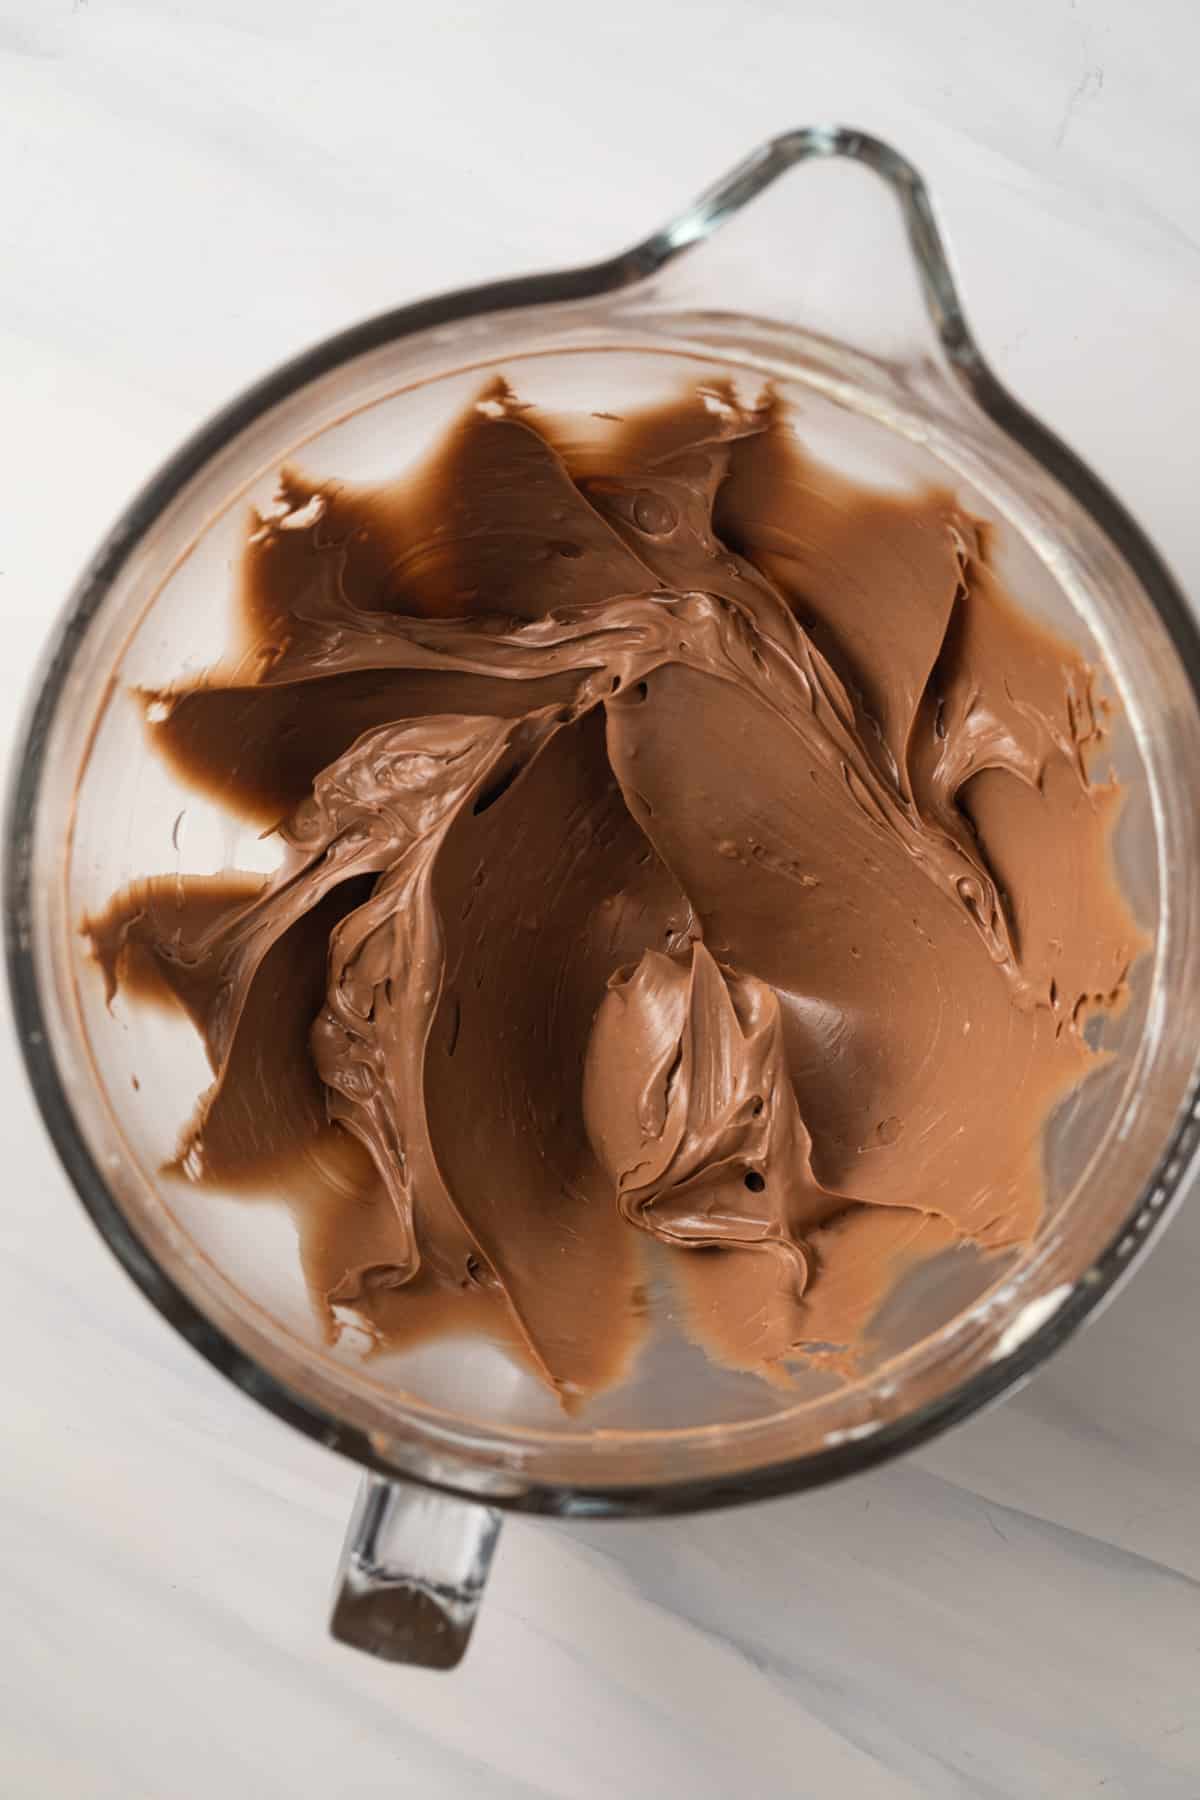 Nutella frosting in mixing bowl.